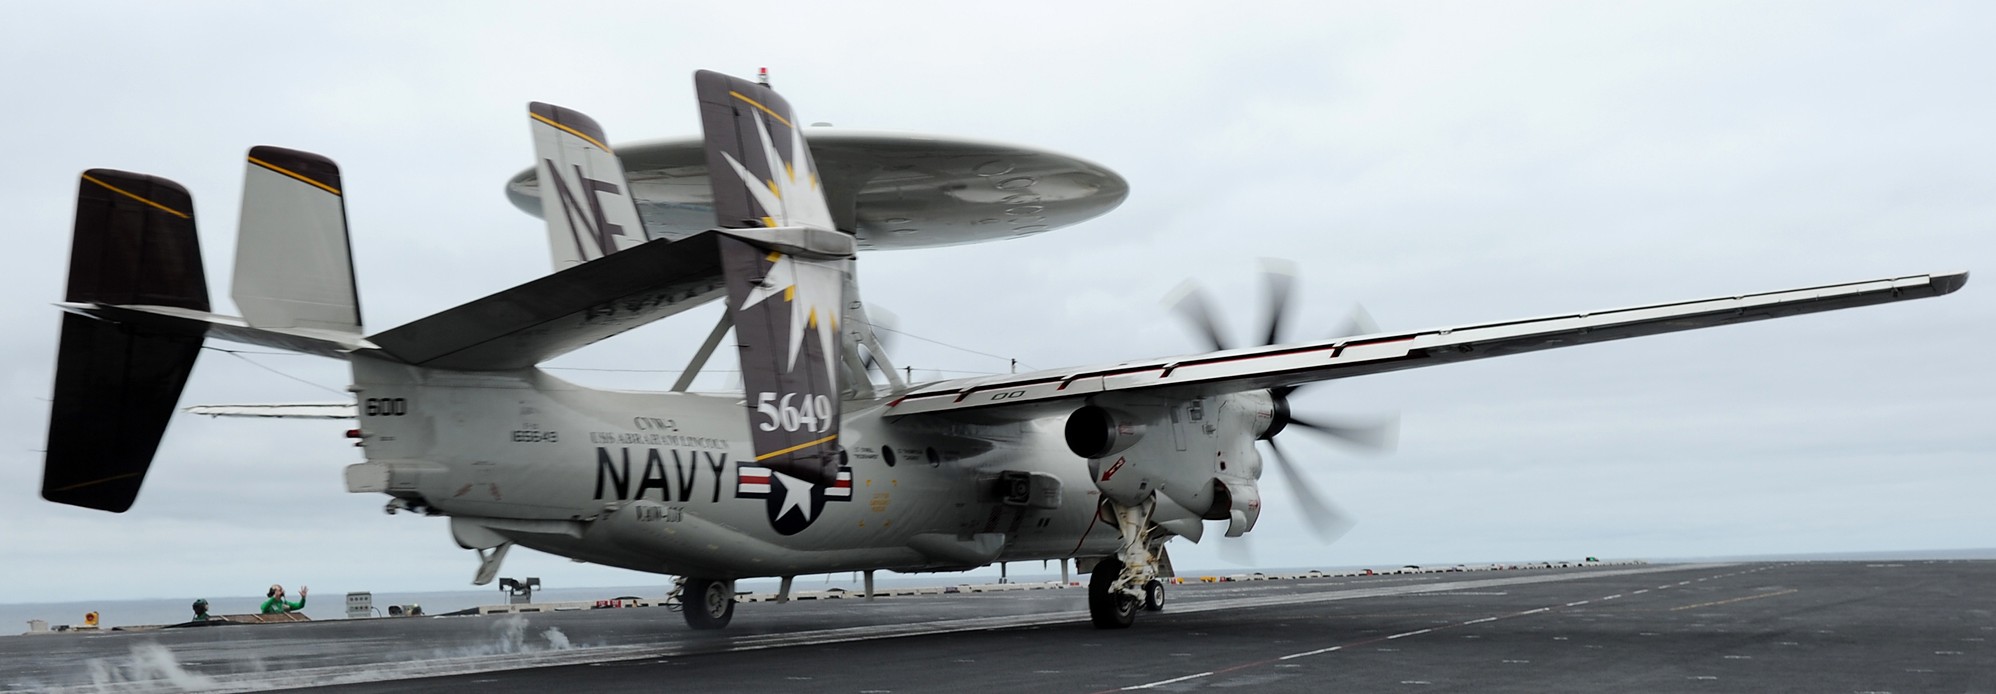 vaw-116 sun kings airborne command control squadron carrier early warning cvw-2 uss abraham lincoln cvn-72 18